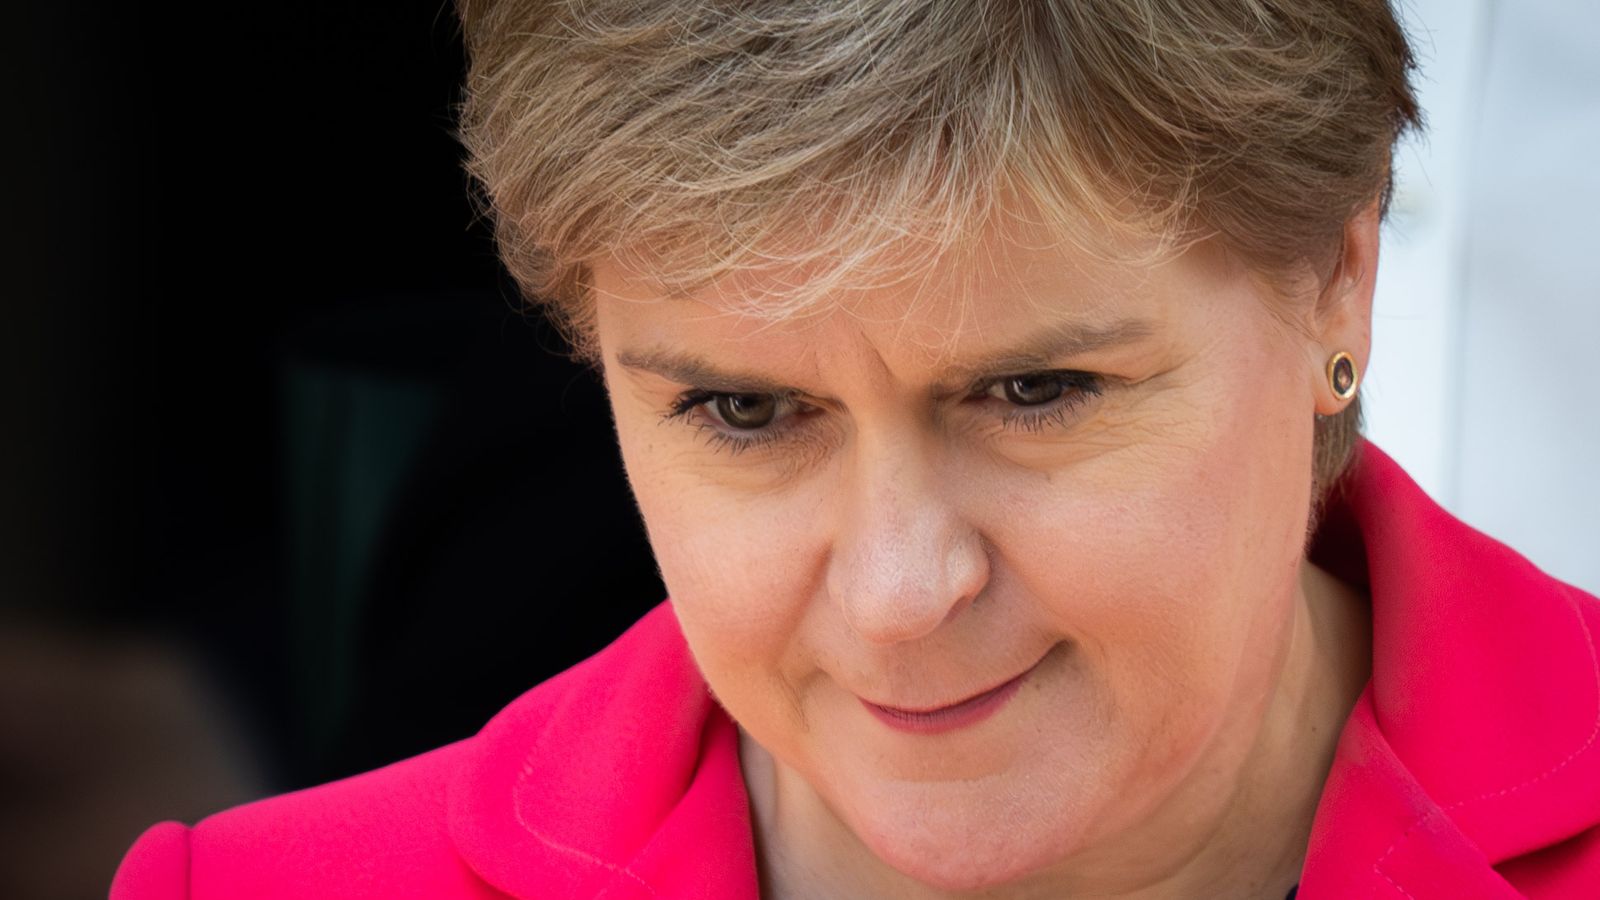 COVID inquiry: Nicola Sturgeon to face interrogation after WhatsApp messages deleted